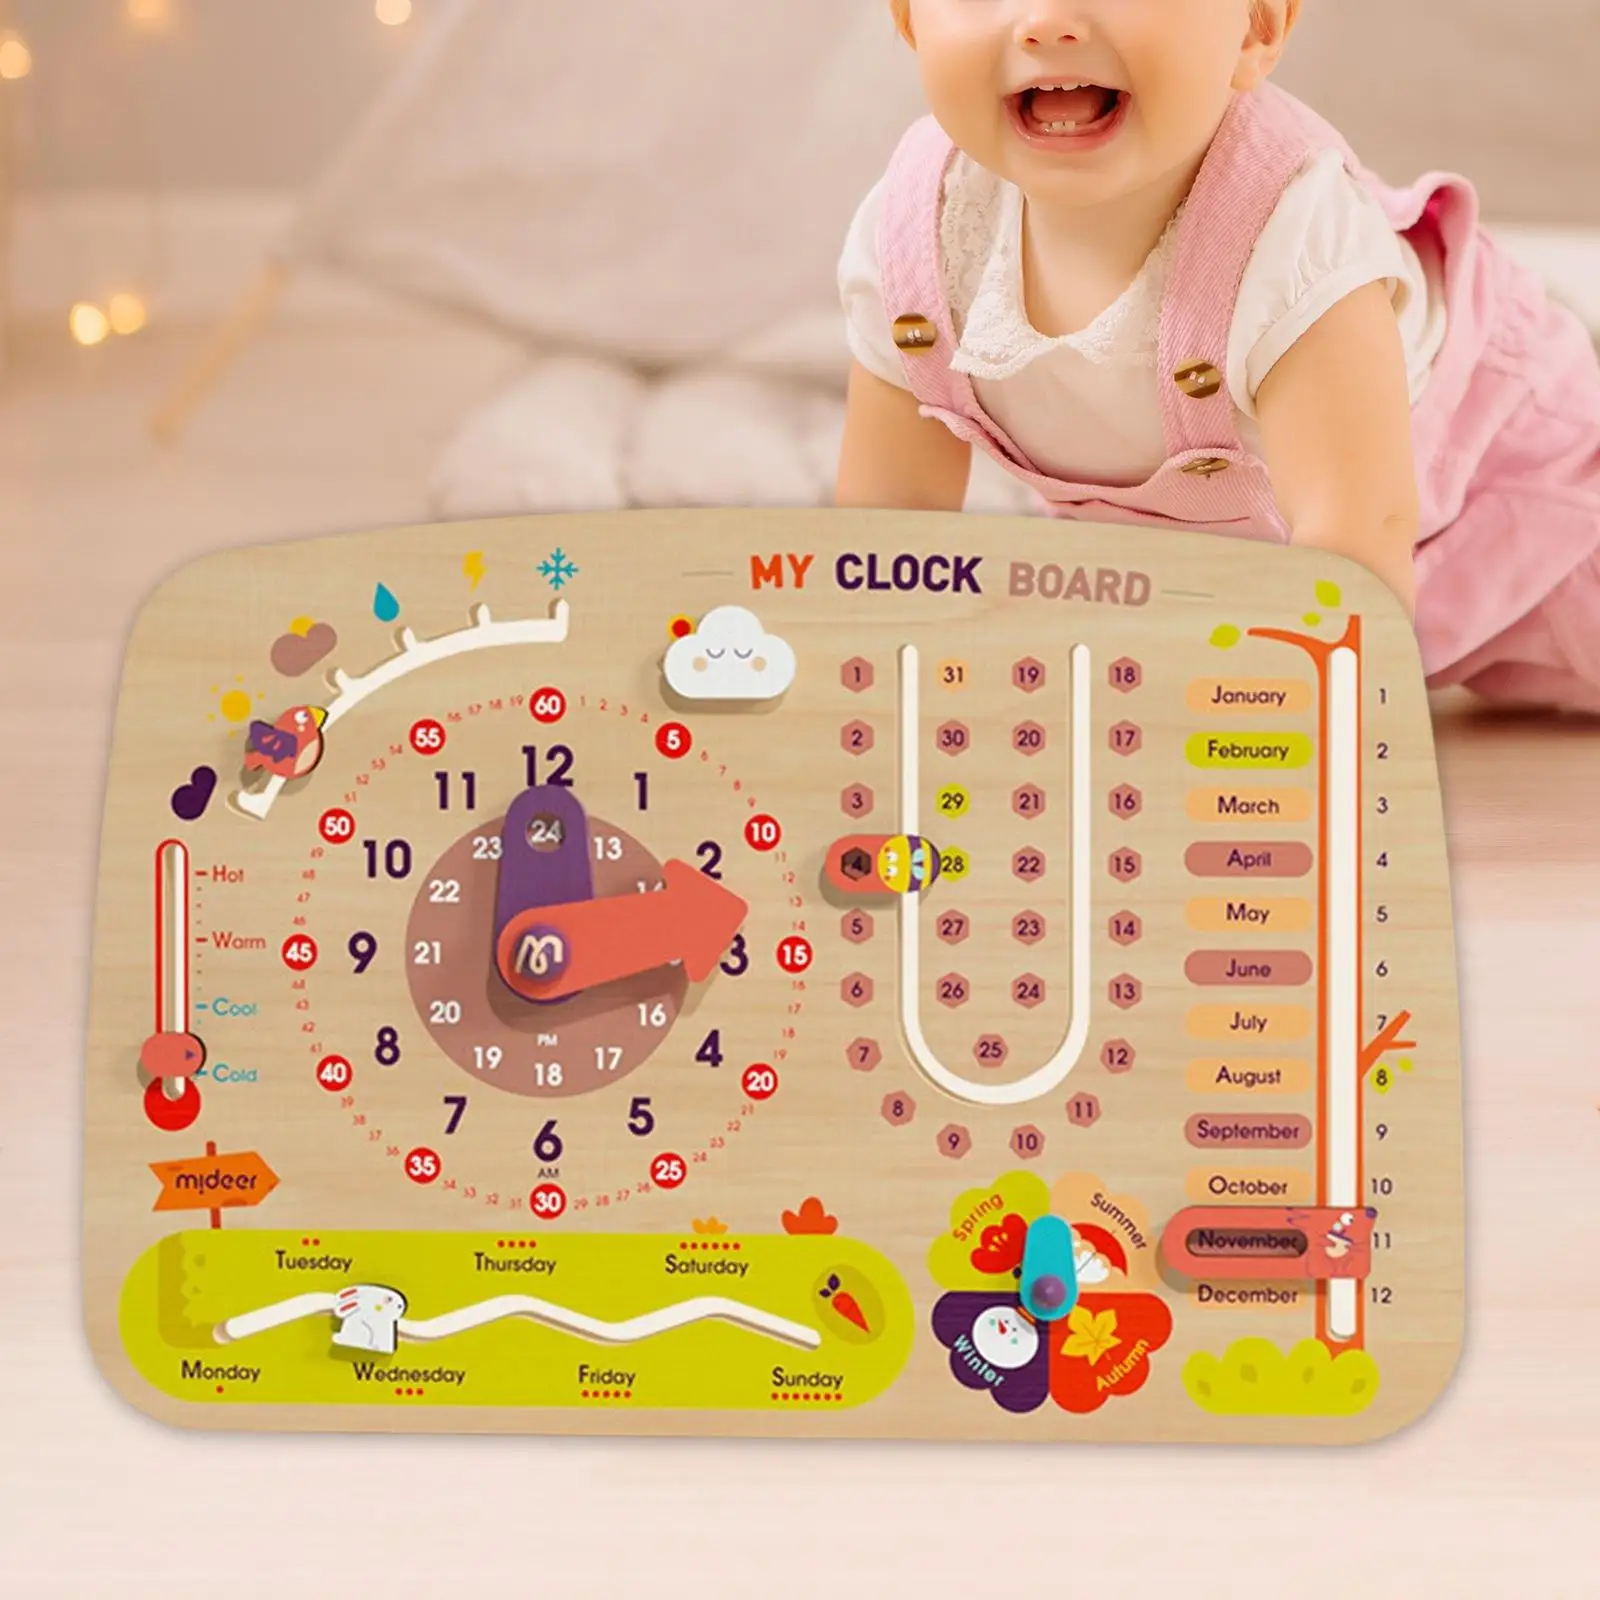 Kids Clock Calendar Daily Calendar Learning Materials All about Today Board